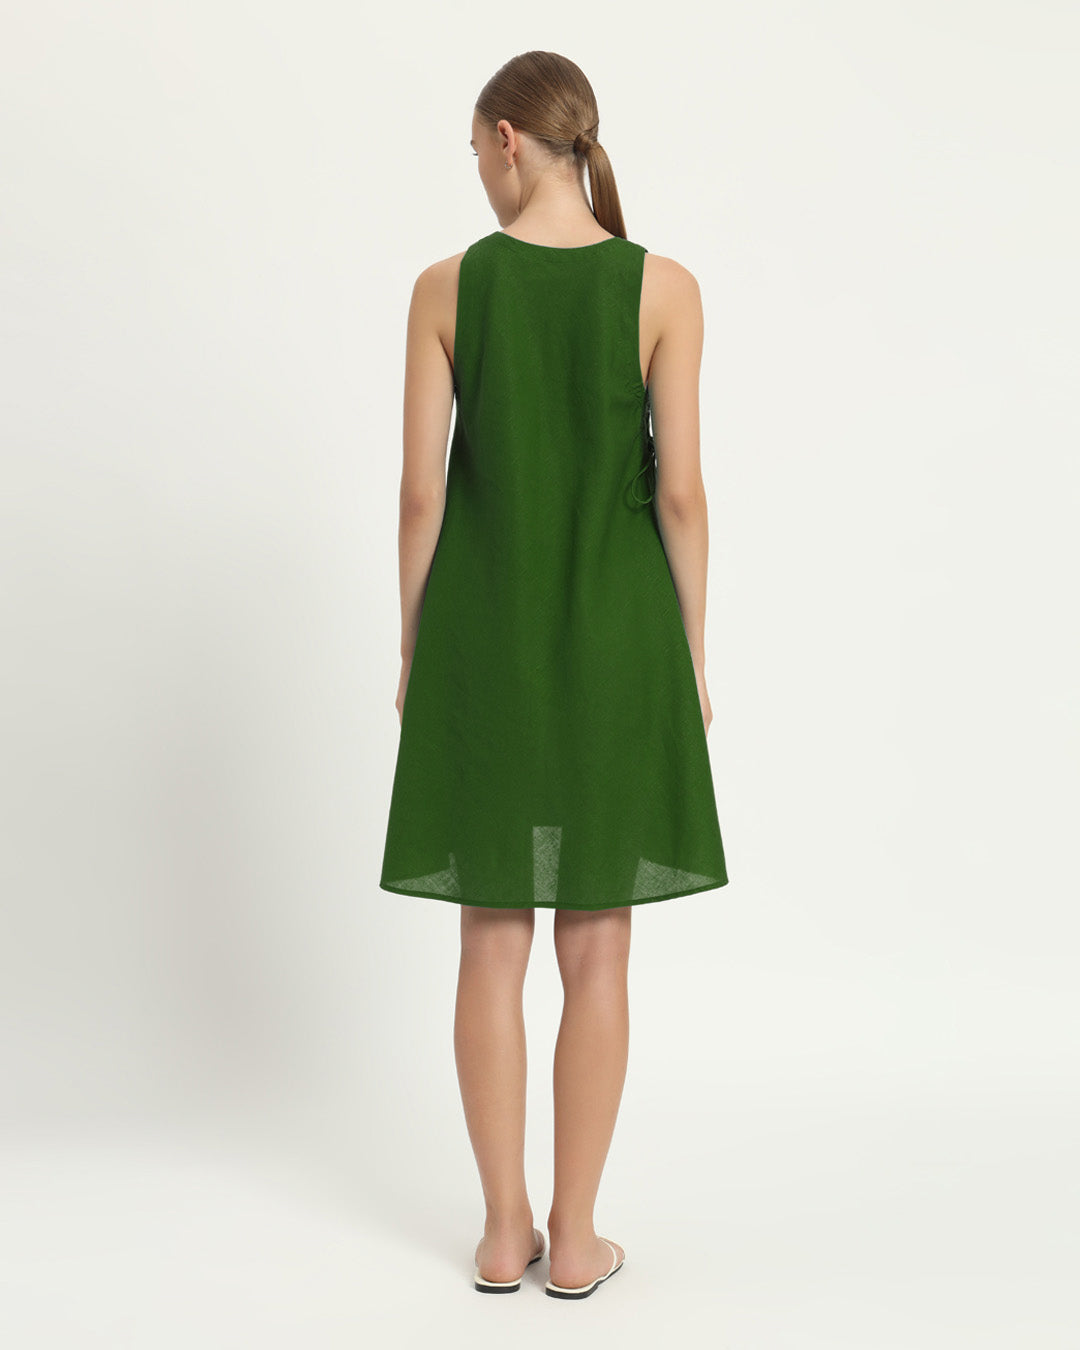 The Rhede Emarld Cotton Dress